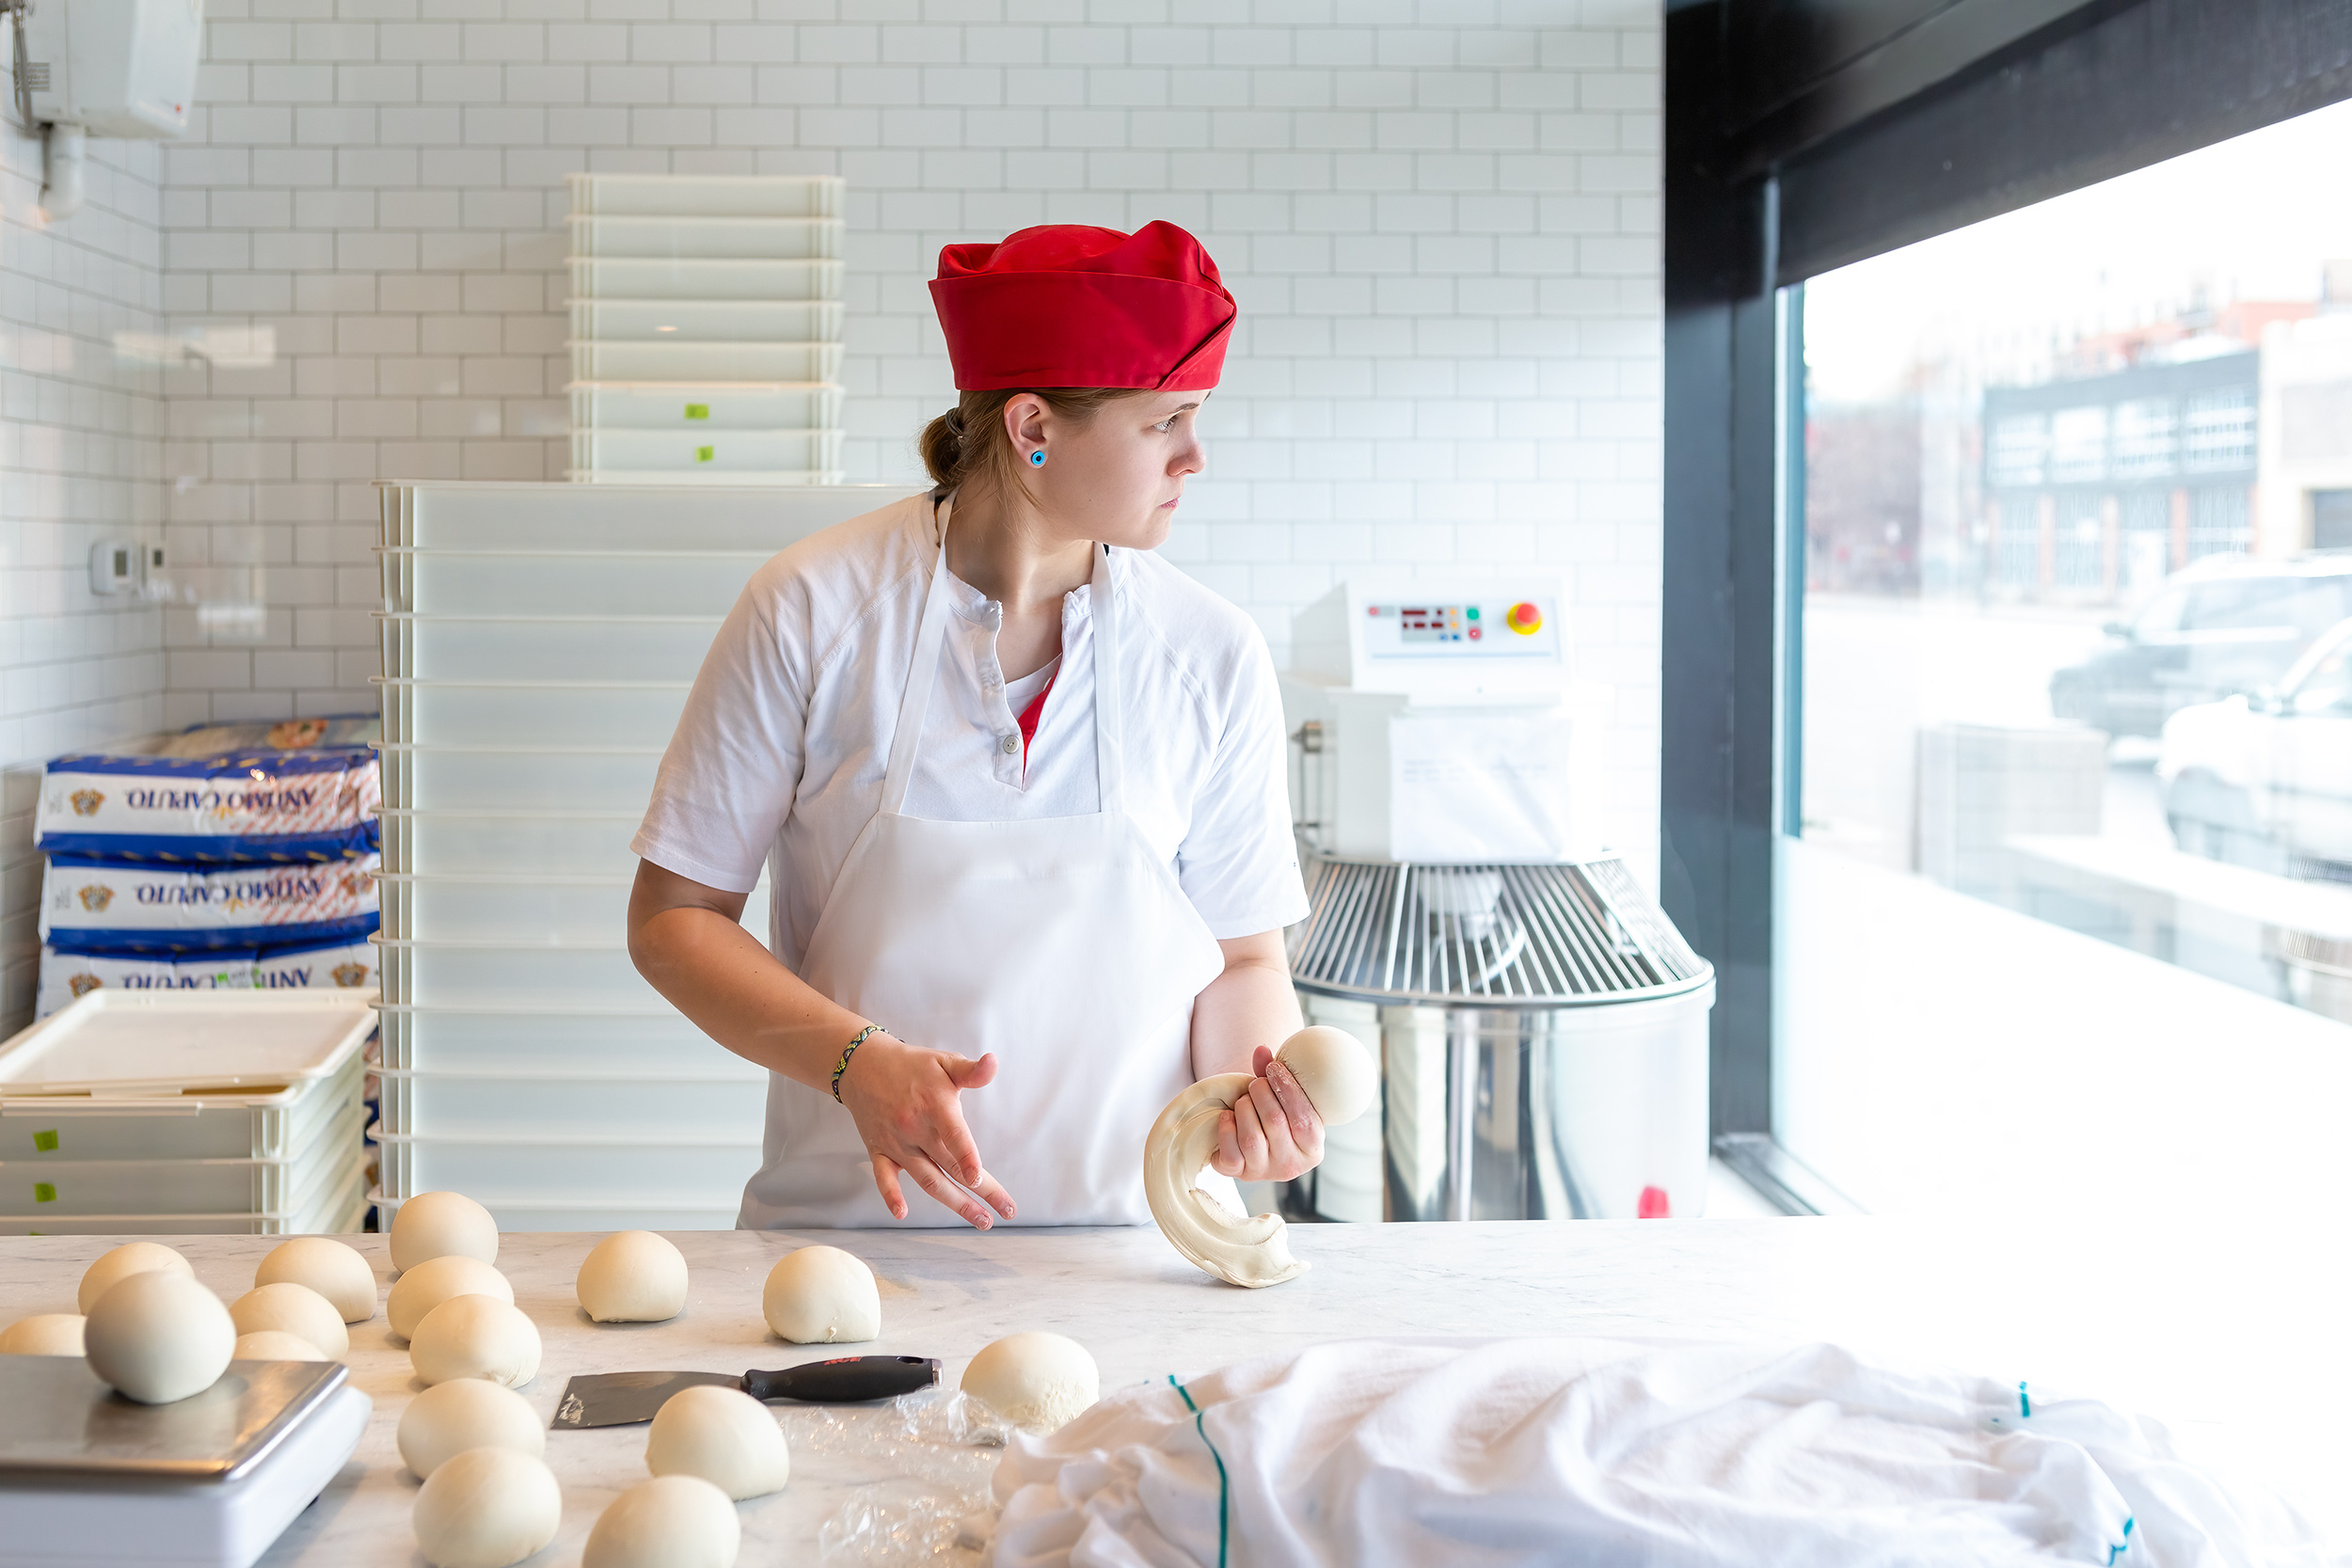 Baker rolling pizza dough on slab near a window with morning natural light for Pizzaria Locale.